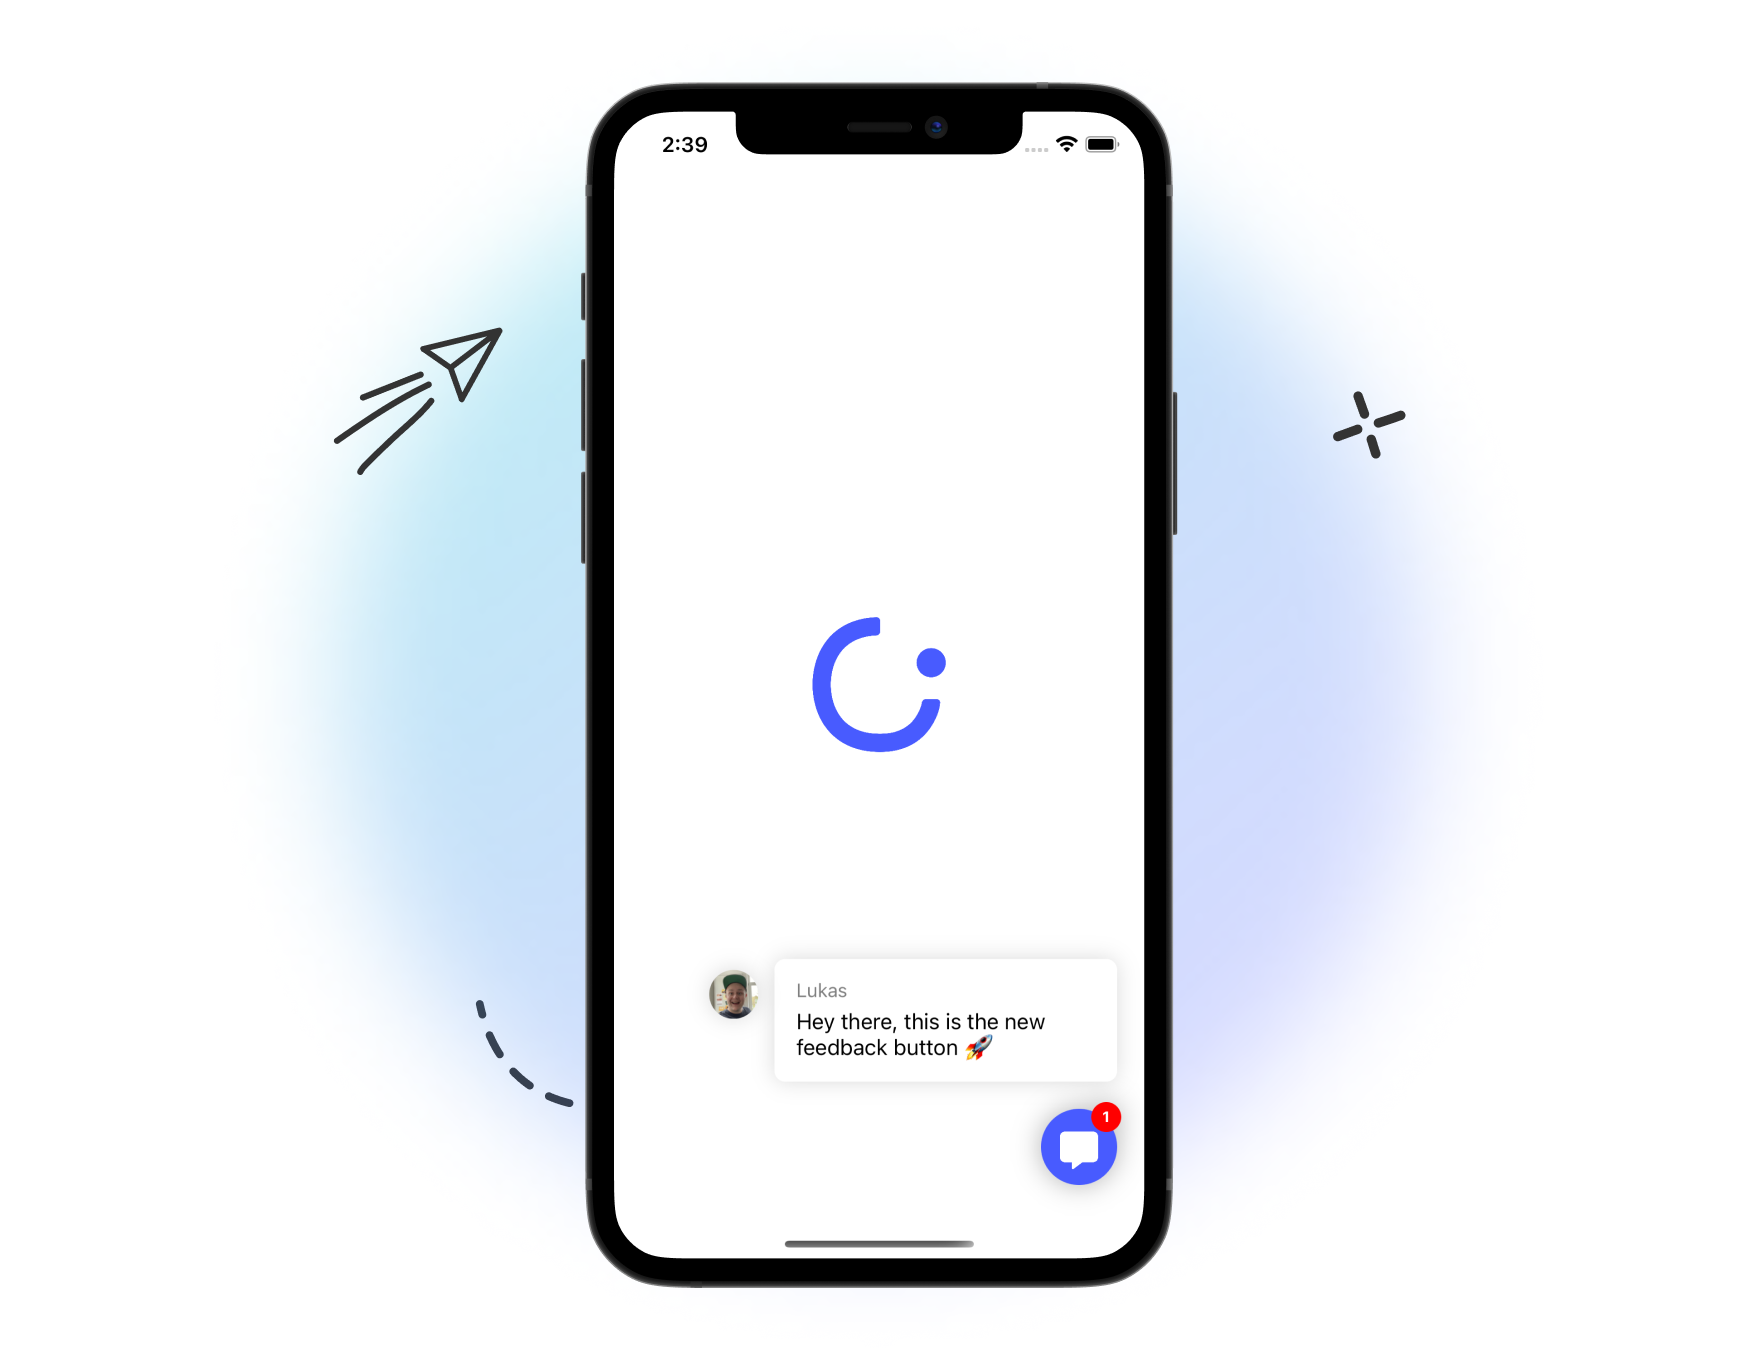 Gleap feedback button with live chat bubble